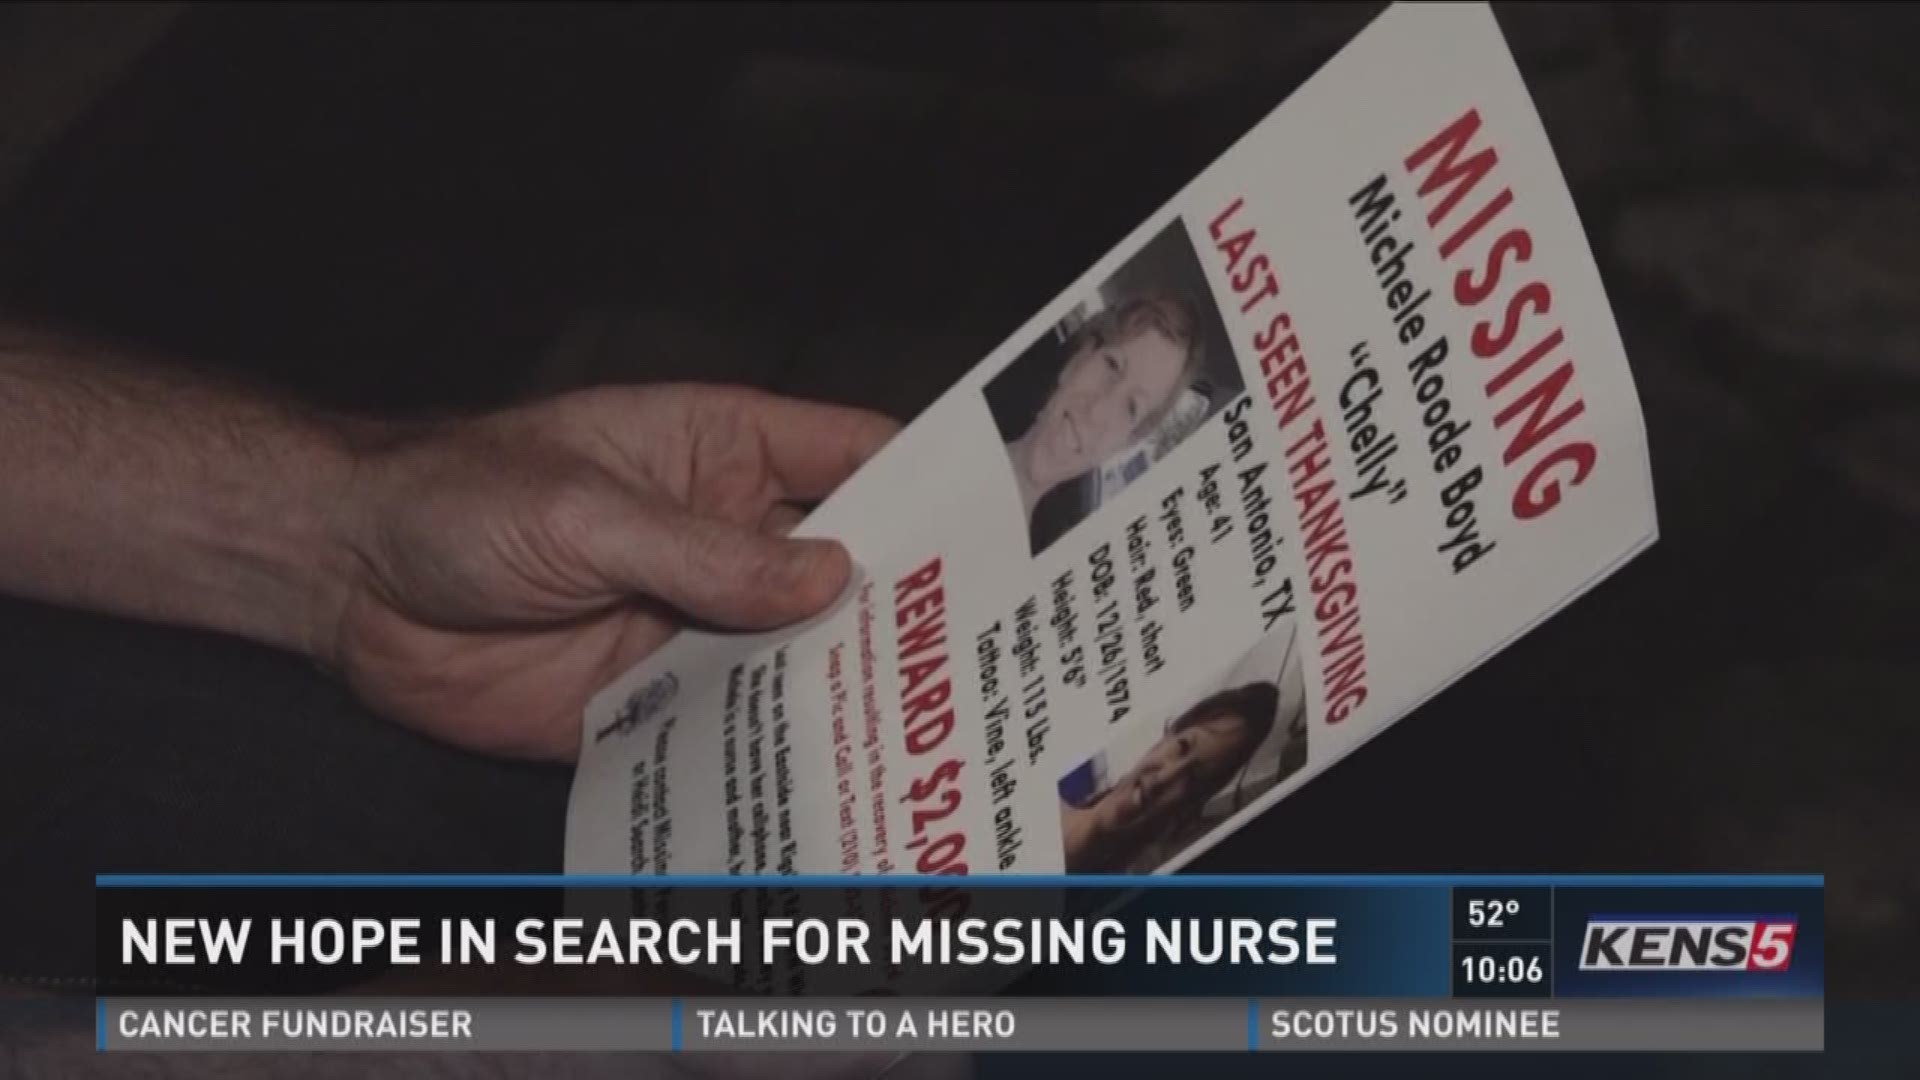 New hope in search for missing nurse